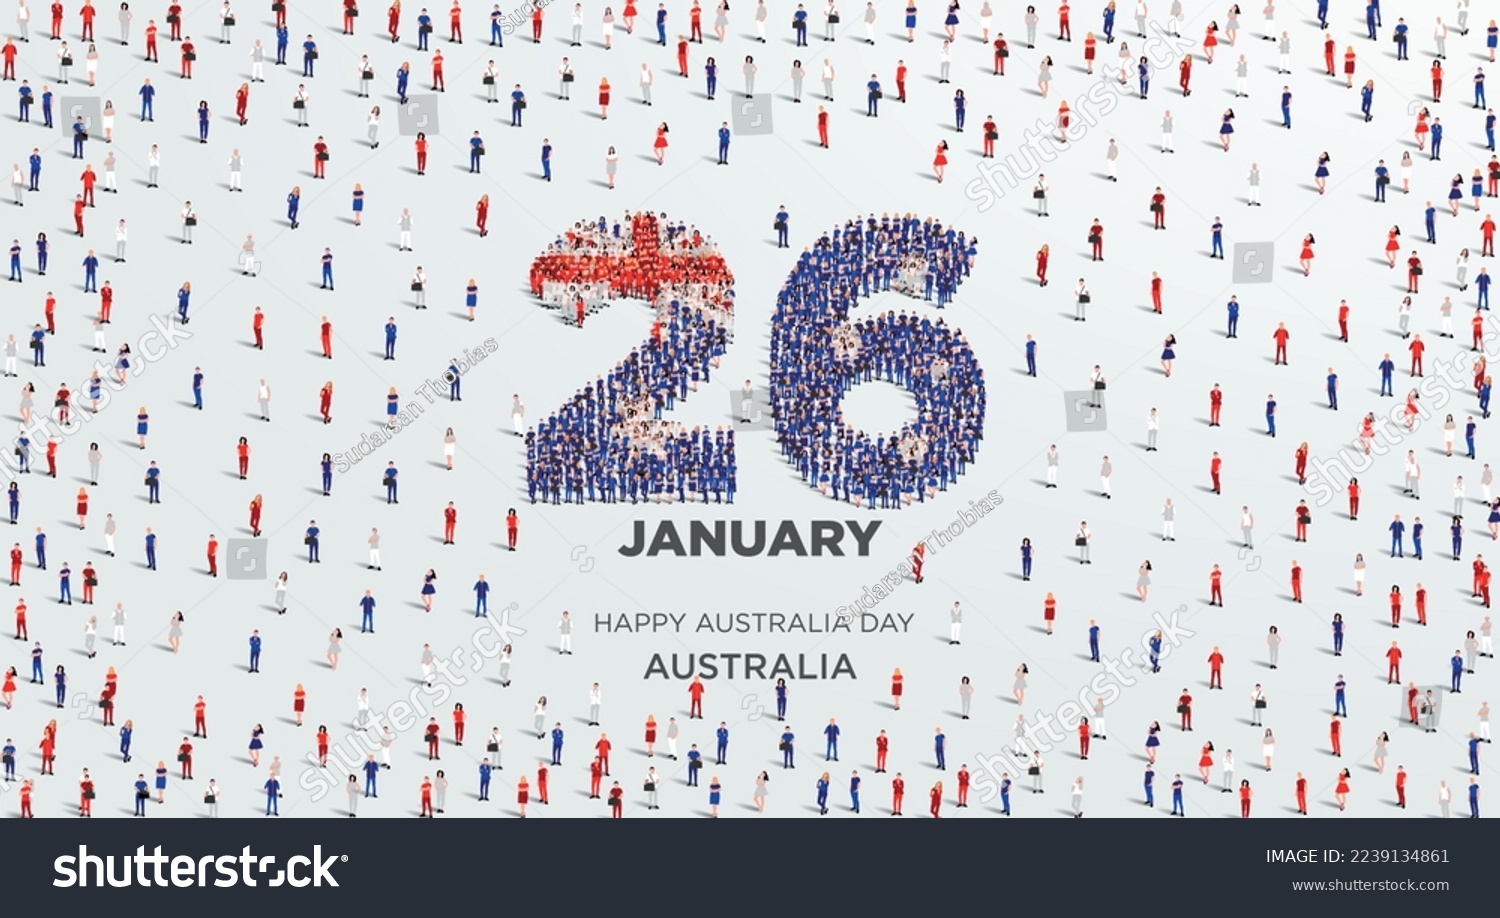 SVG of Happy Australia Day. A large group of people form to create the number 26 as Australia celebrates its Australia Day on the 26th of January. Vector illustration. svg